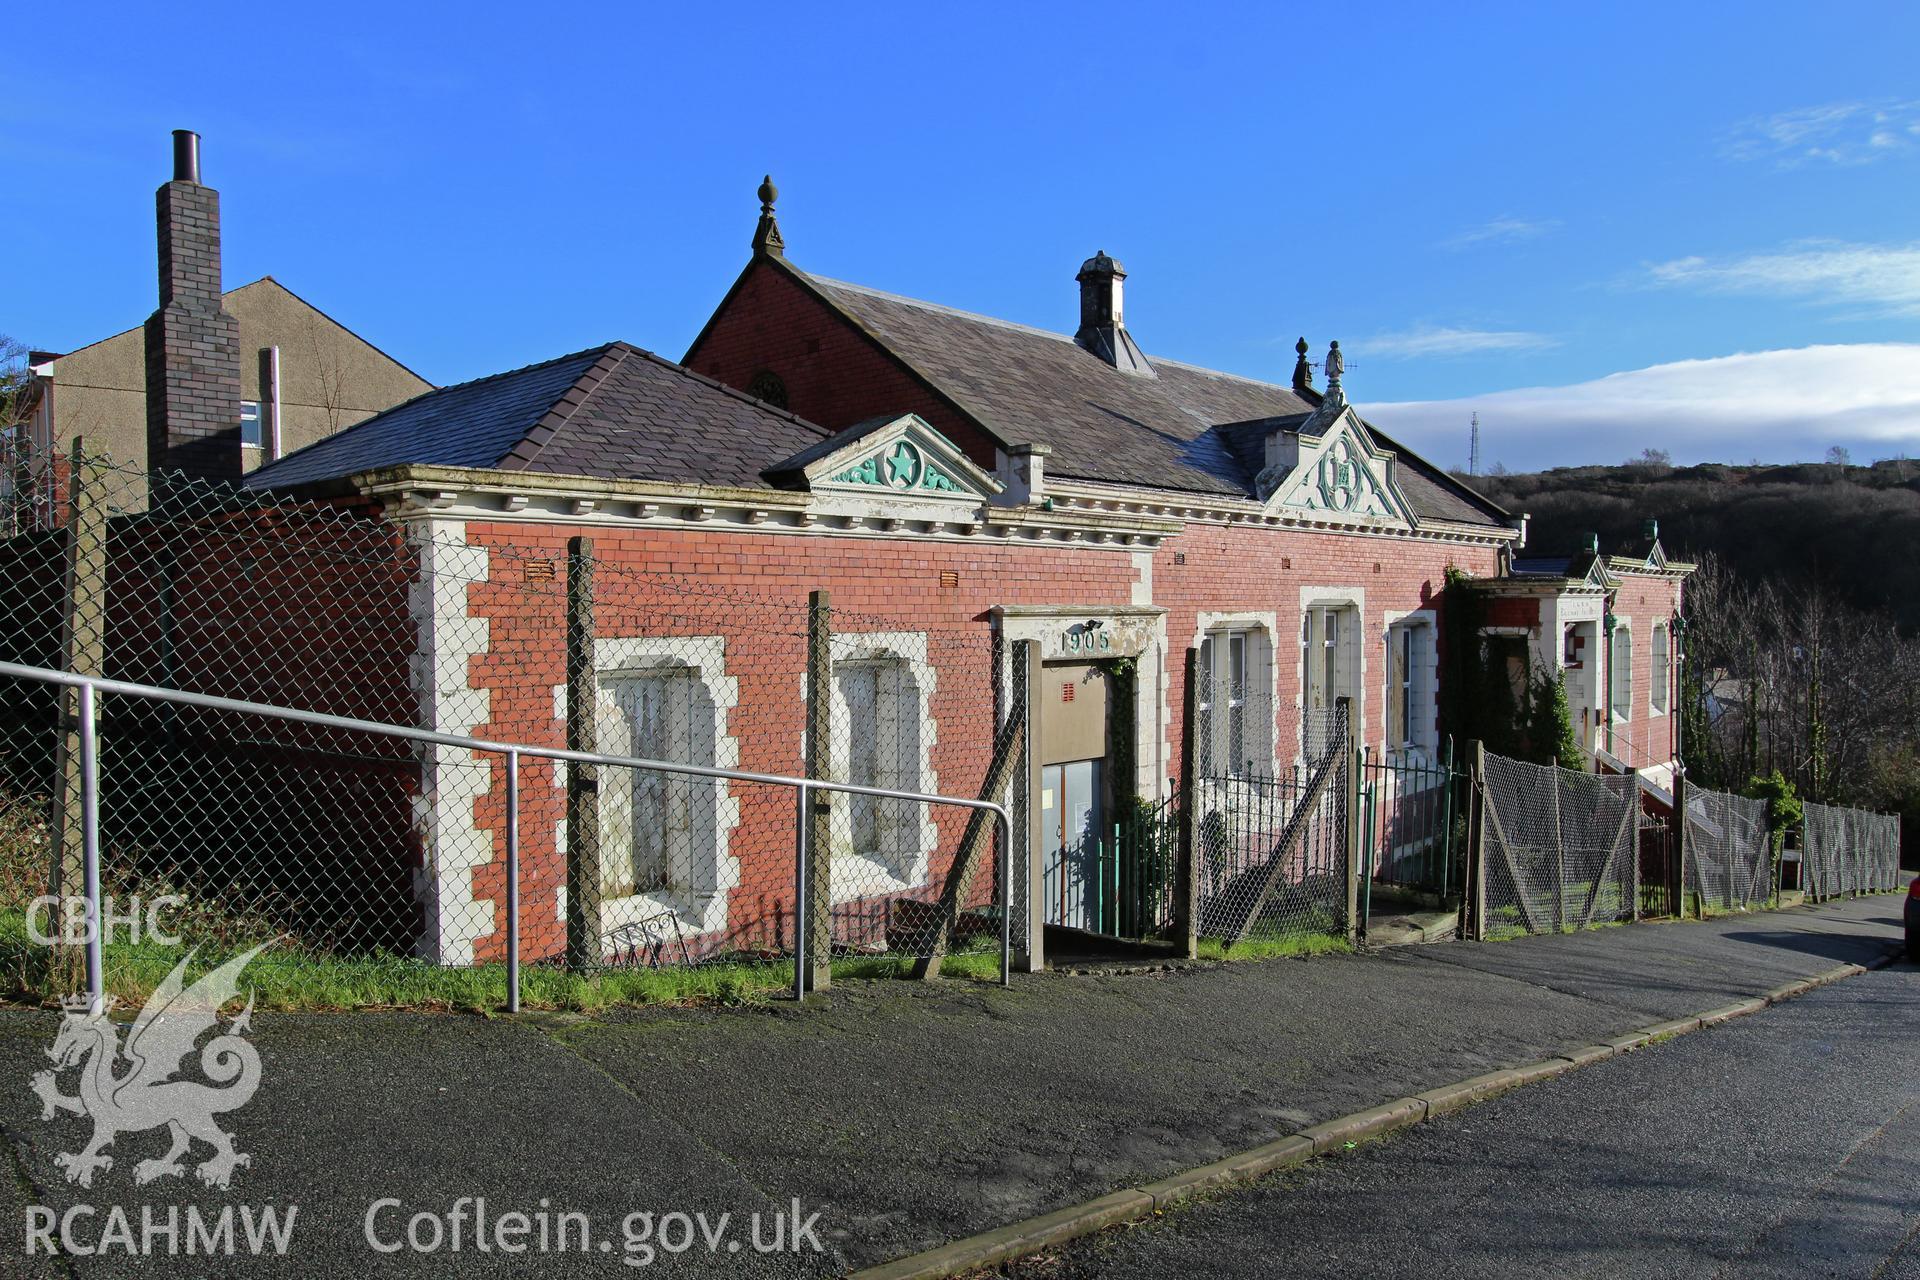 Exterior view showing front elevation of the Railway Institute, Bangor. Photographed during survey conducted by Sue Fielding for the RCAHMW on 4th April 2016.